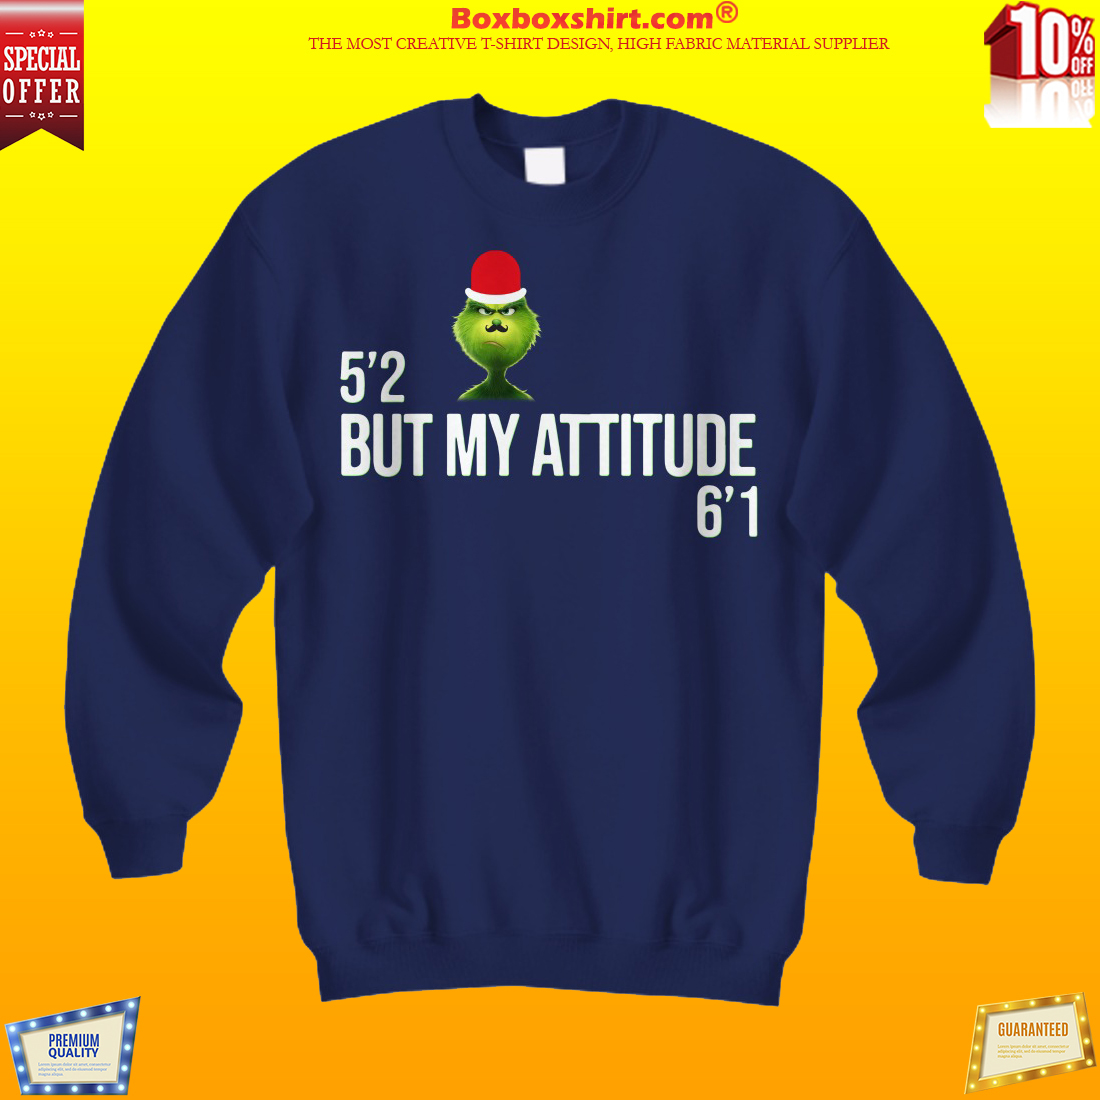 Grinch 5'2 but my attitude 6'1 shirt and hoodies